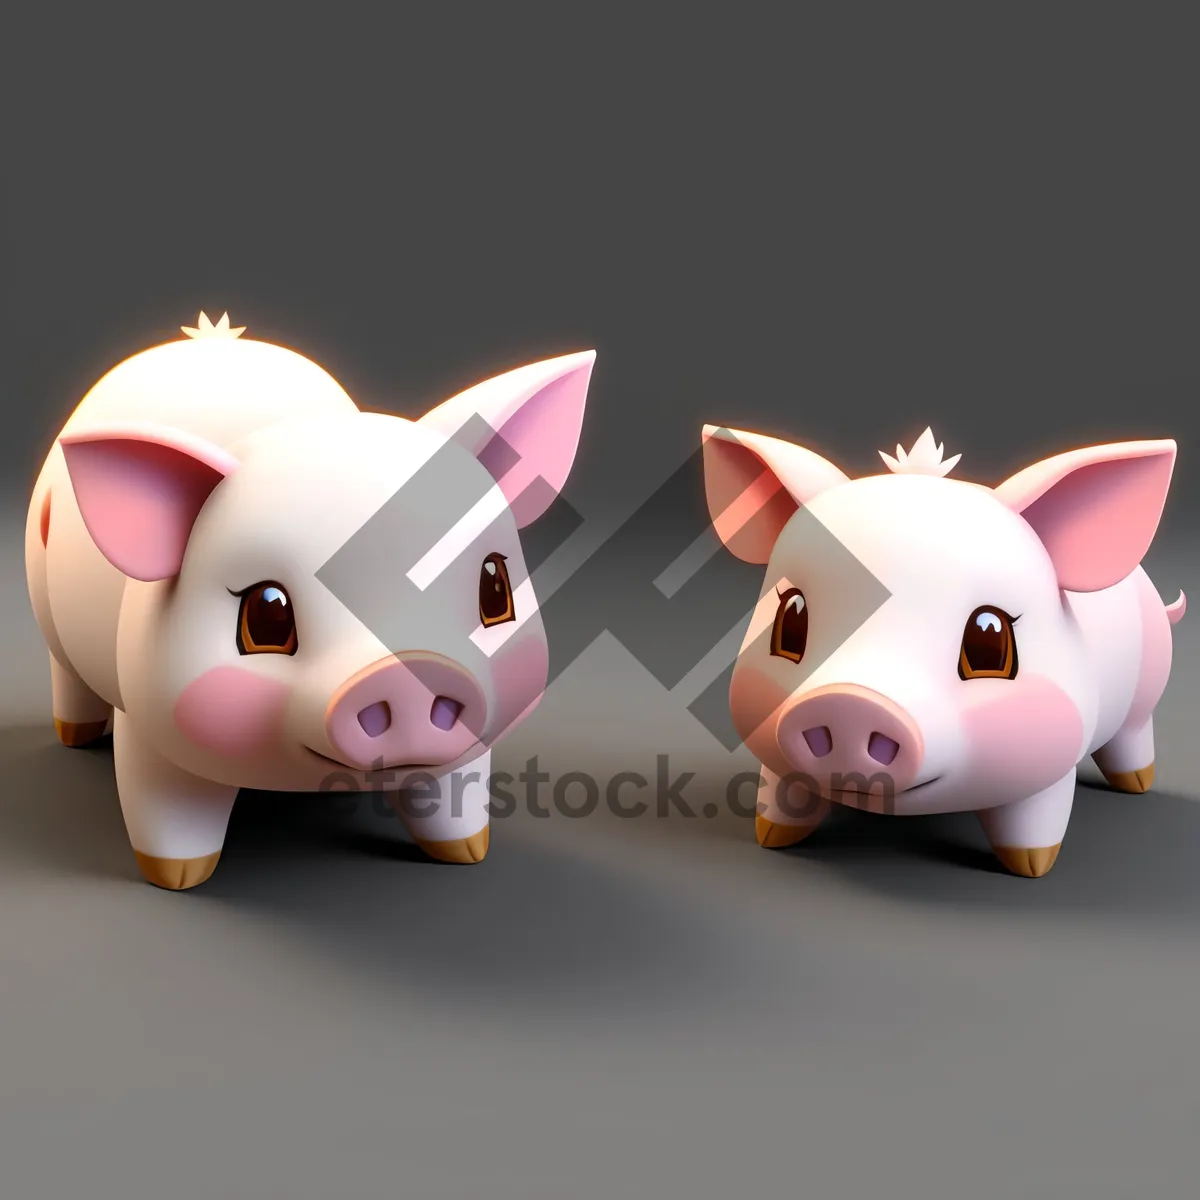 Picture of Piggy Bank: Symbol of Savings and Wealth